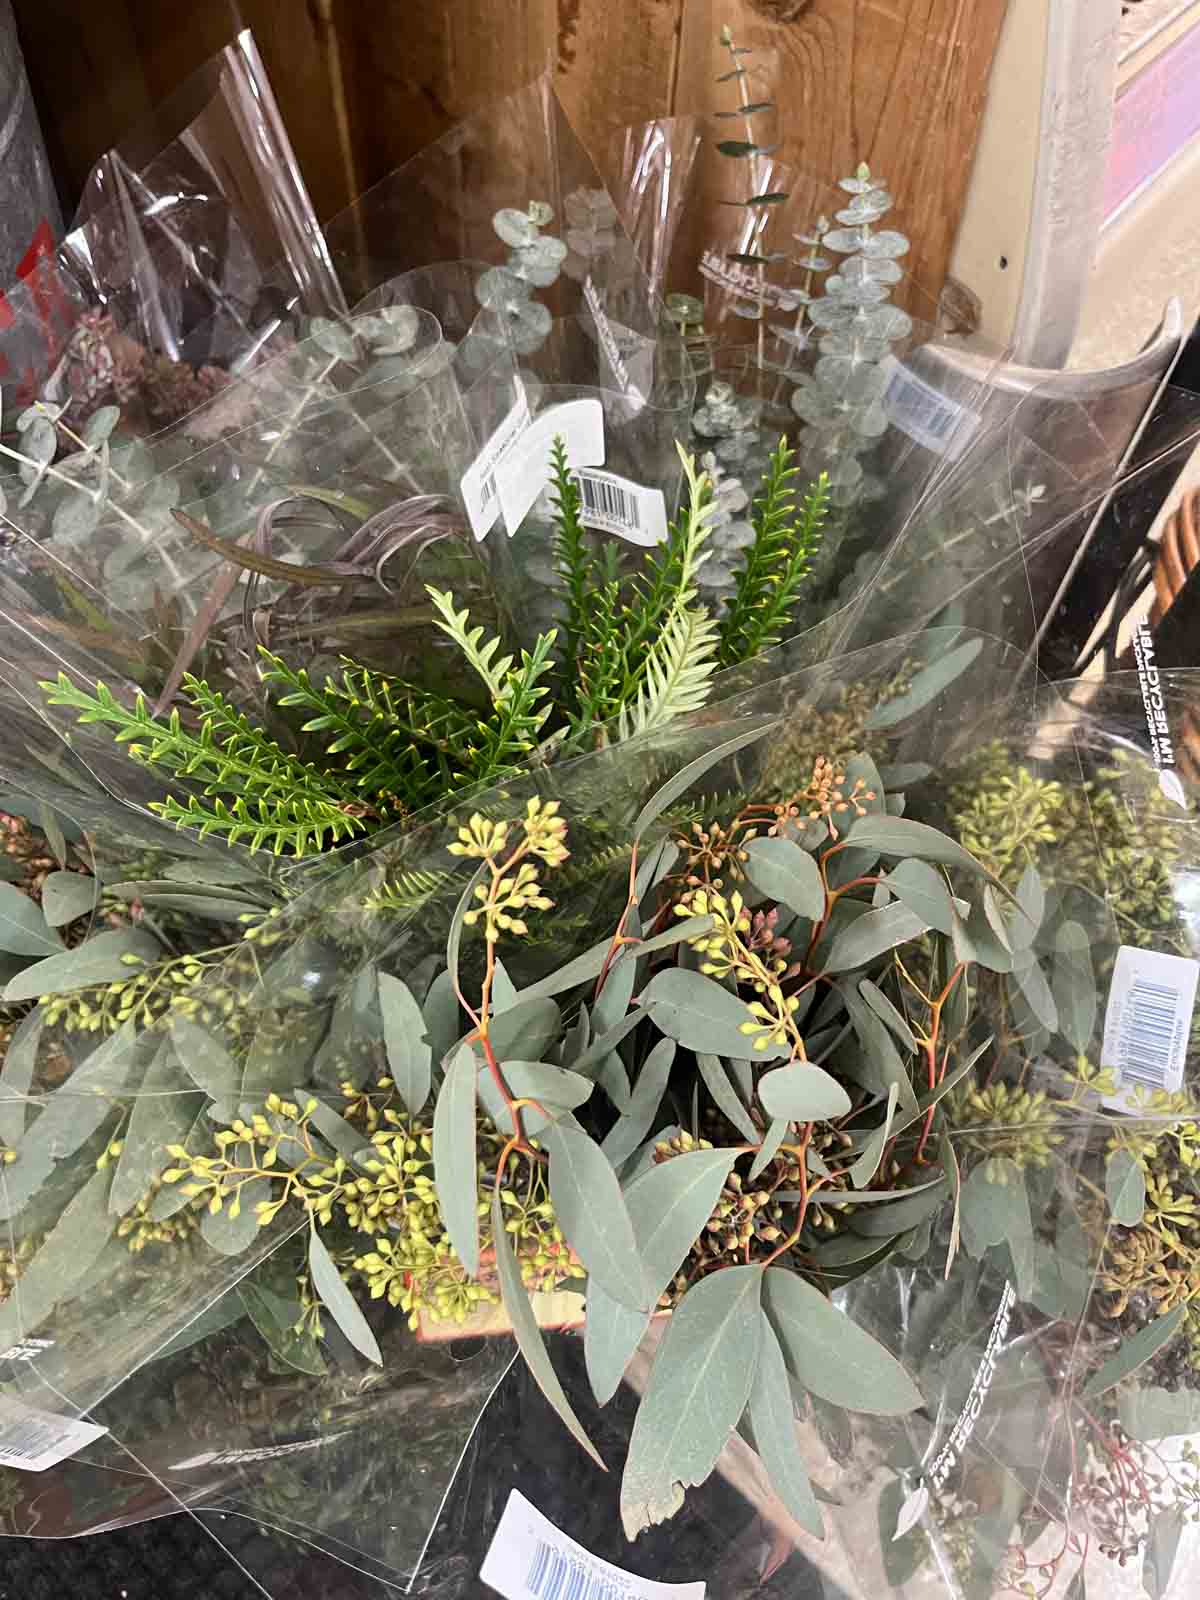 Trader Joe's greenery in the store.